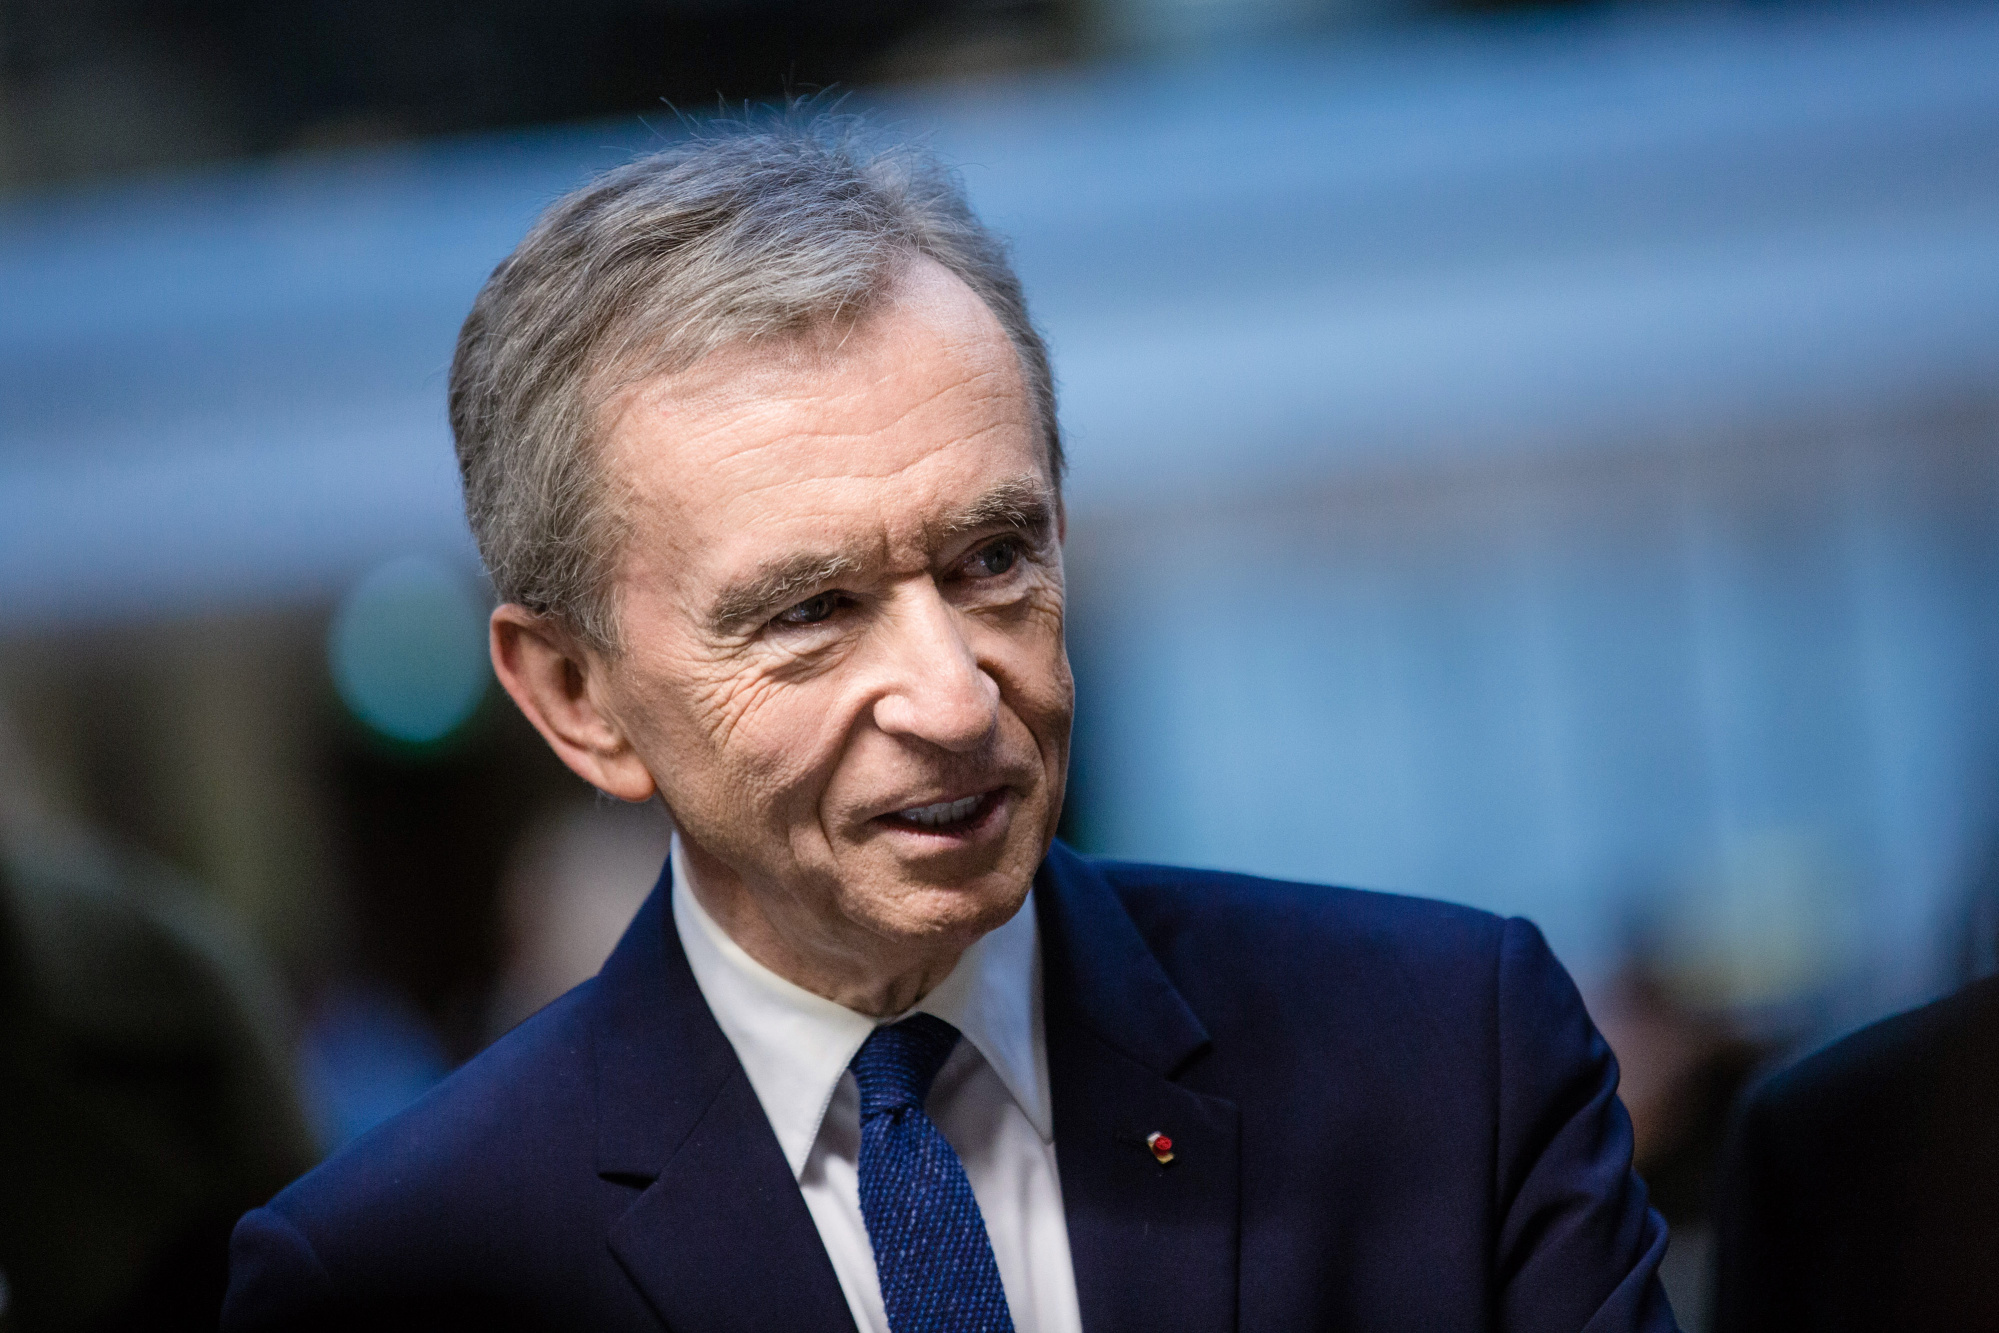 LVMH promotes Arnault scion to lead Tiffany after $16 bn deal